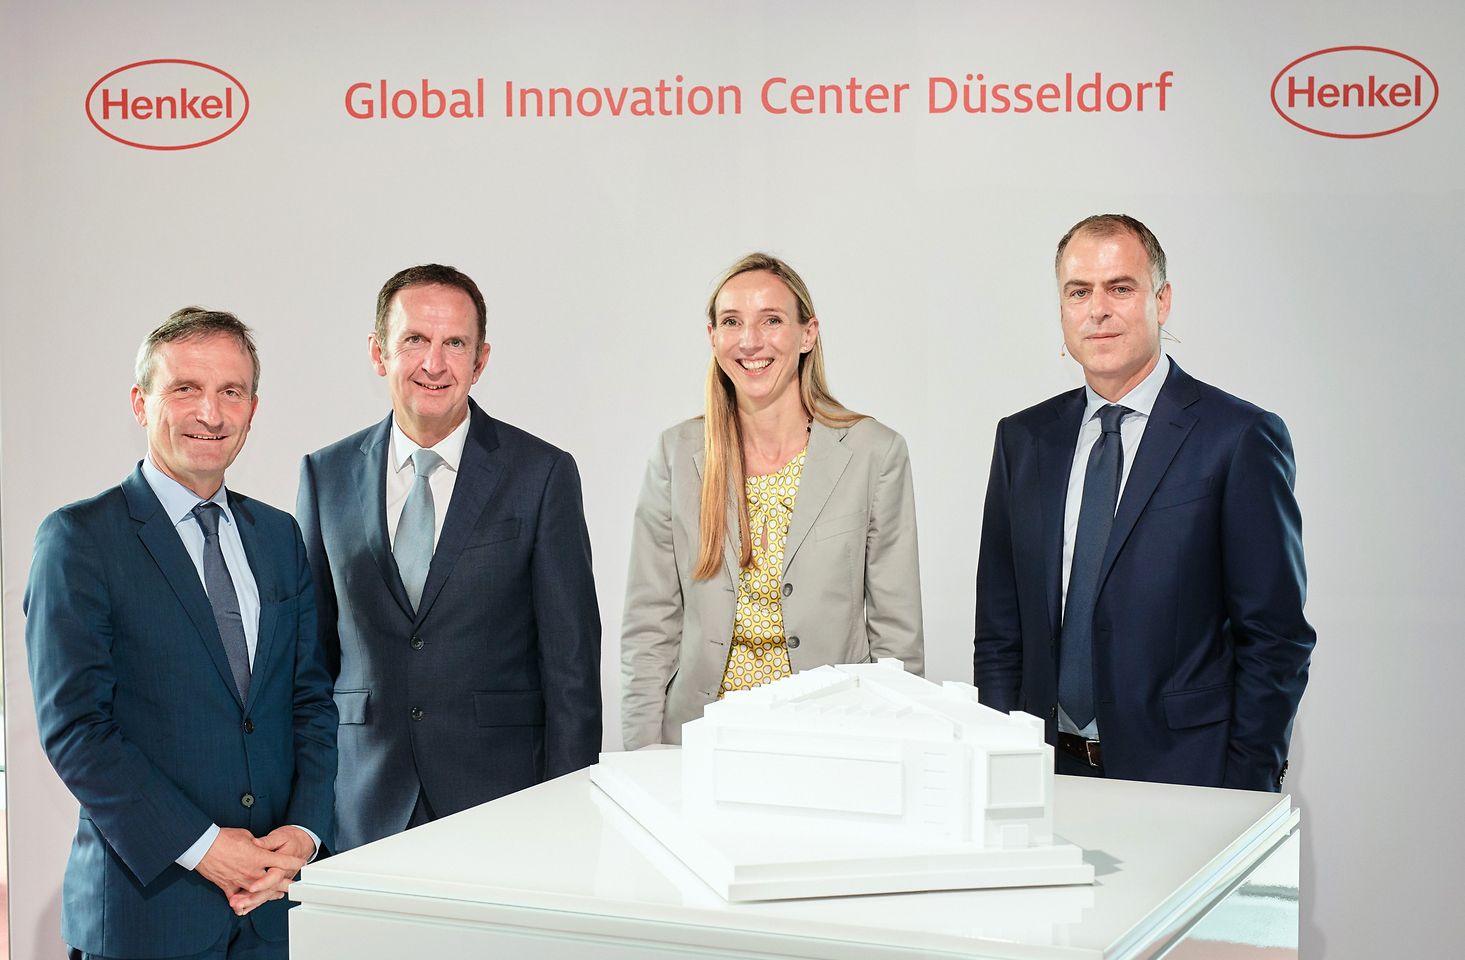 The new innovation center 3D-printed with Henkel materials